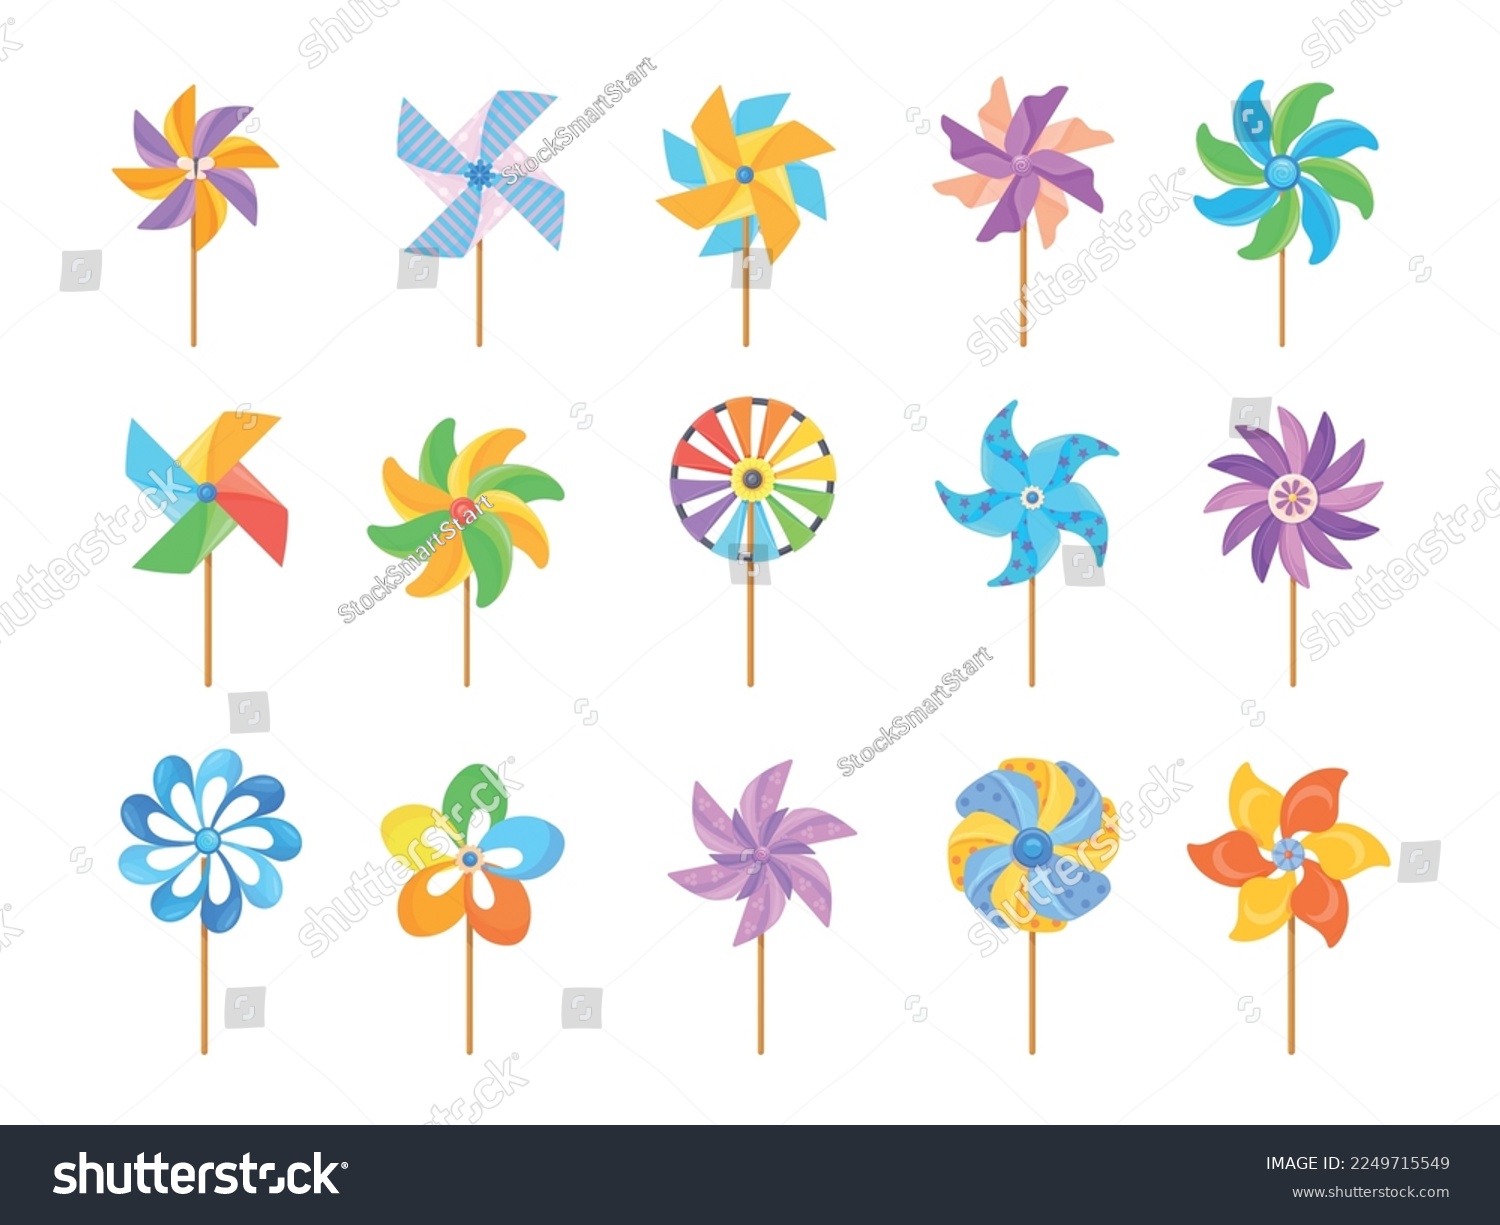 Windmill toy. Paper pinwheel toys, cartoon wind vane summer breeze weather, colored child origami mill pin wheel with flower for baby fan weathercock, neat vector illustration of wheel windmill rotate #2249715549